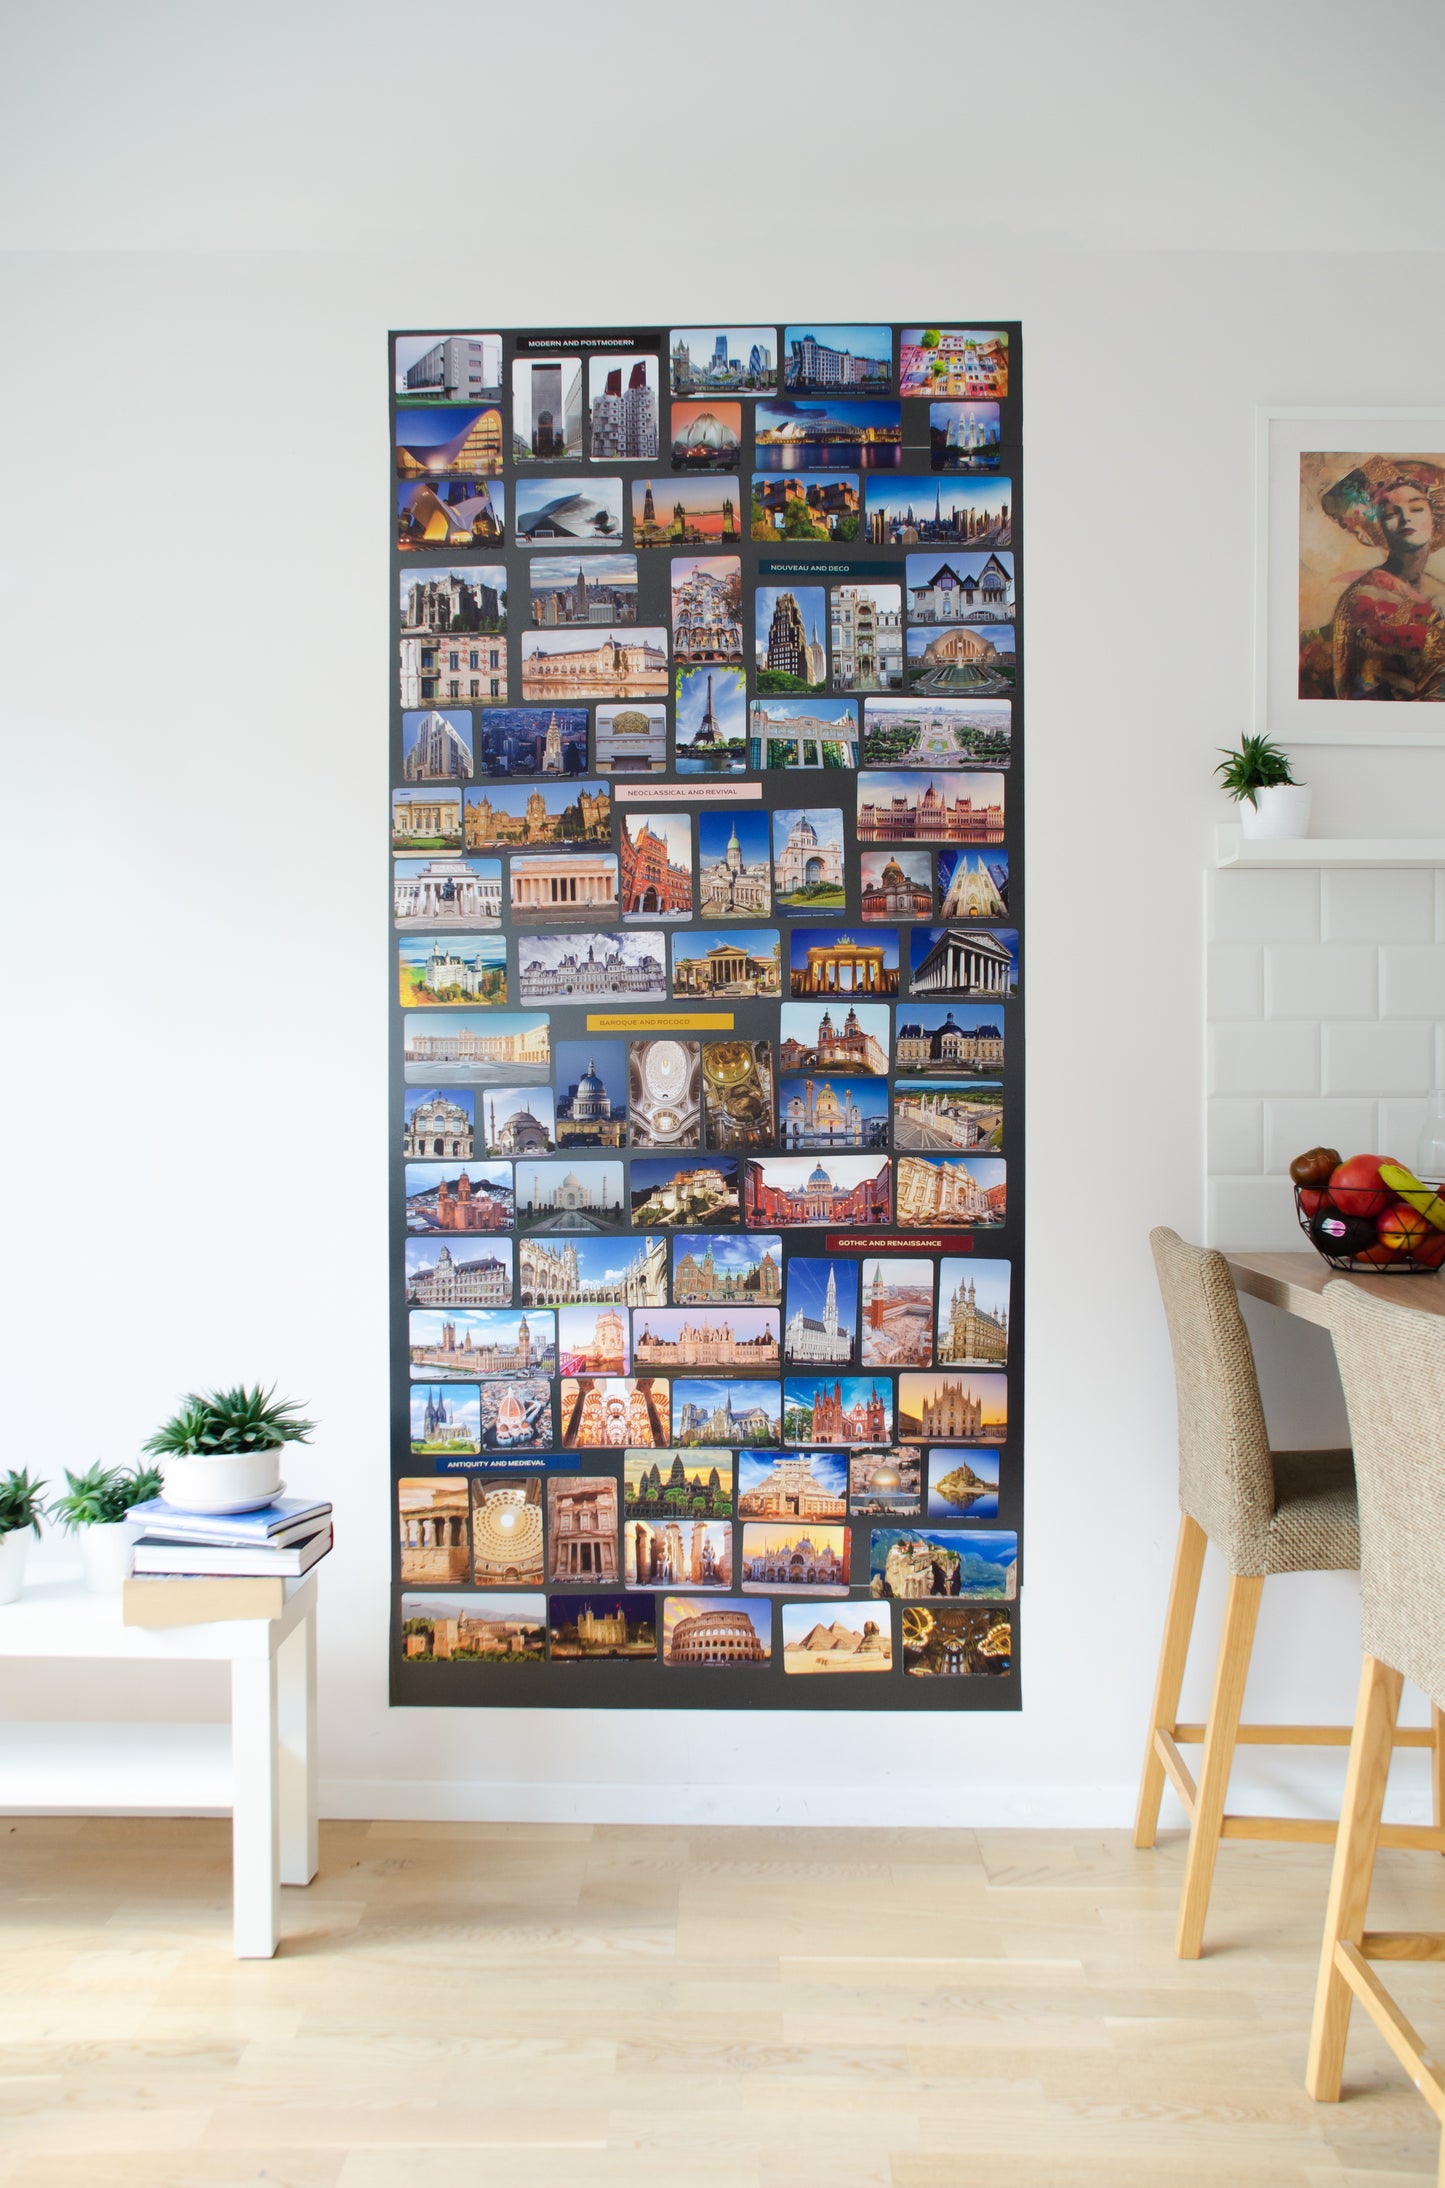 Large ARCHITECTUREWALL + 90 Architecture Magnets